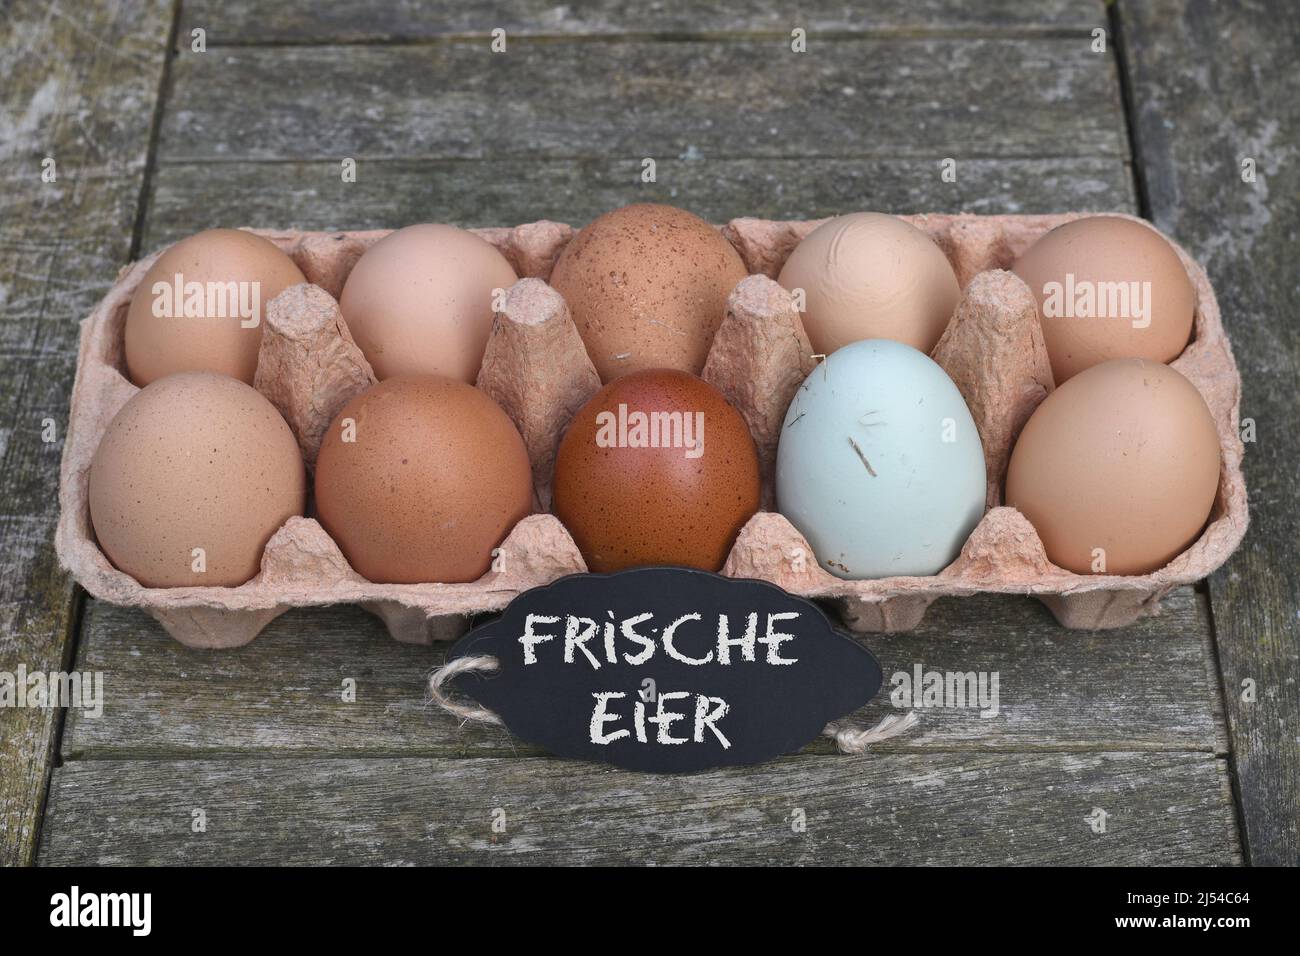 chalkboard with the inscription 'Frische Eier' in front of chicken eggs in the egg carton, Germany Stock Photo